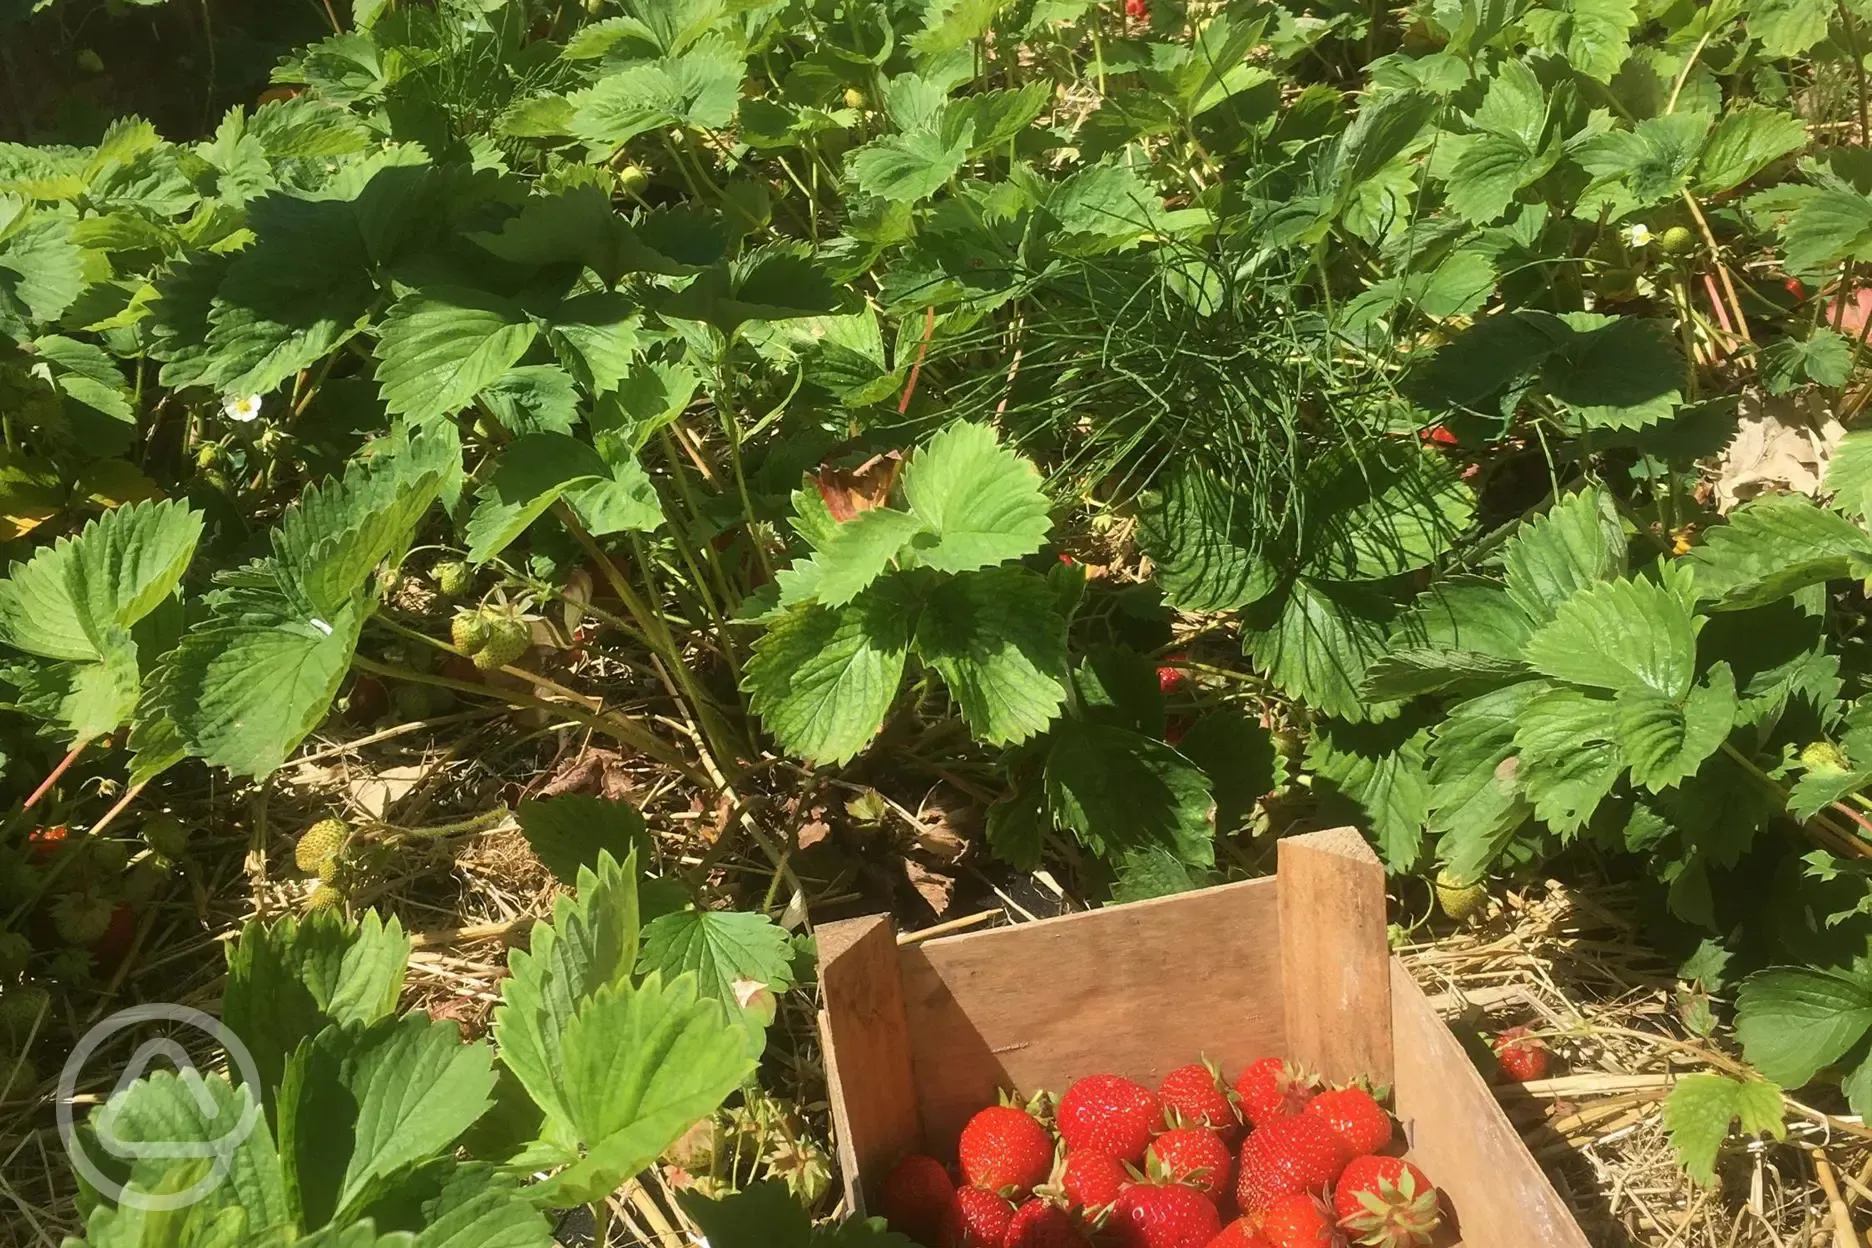 Pick your own strawberries!